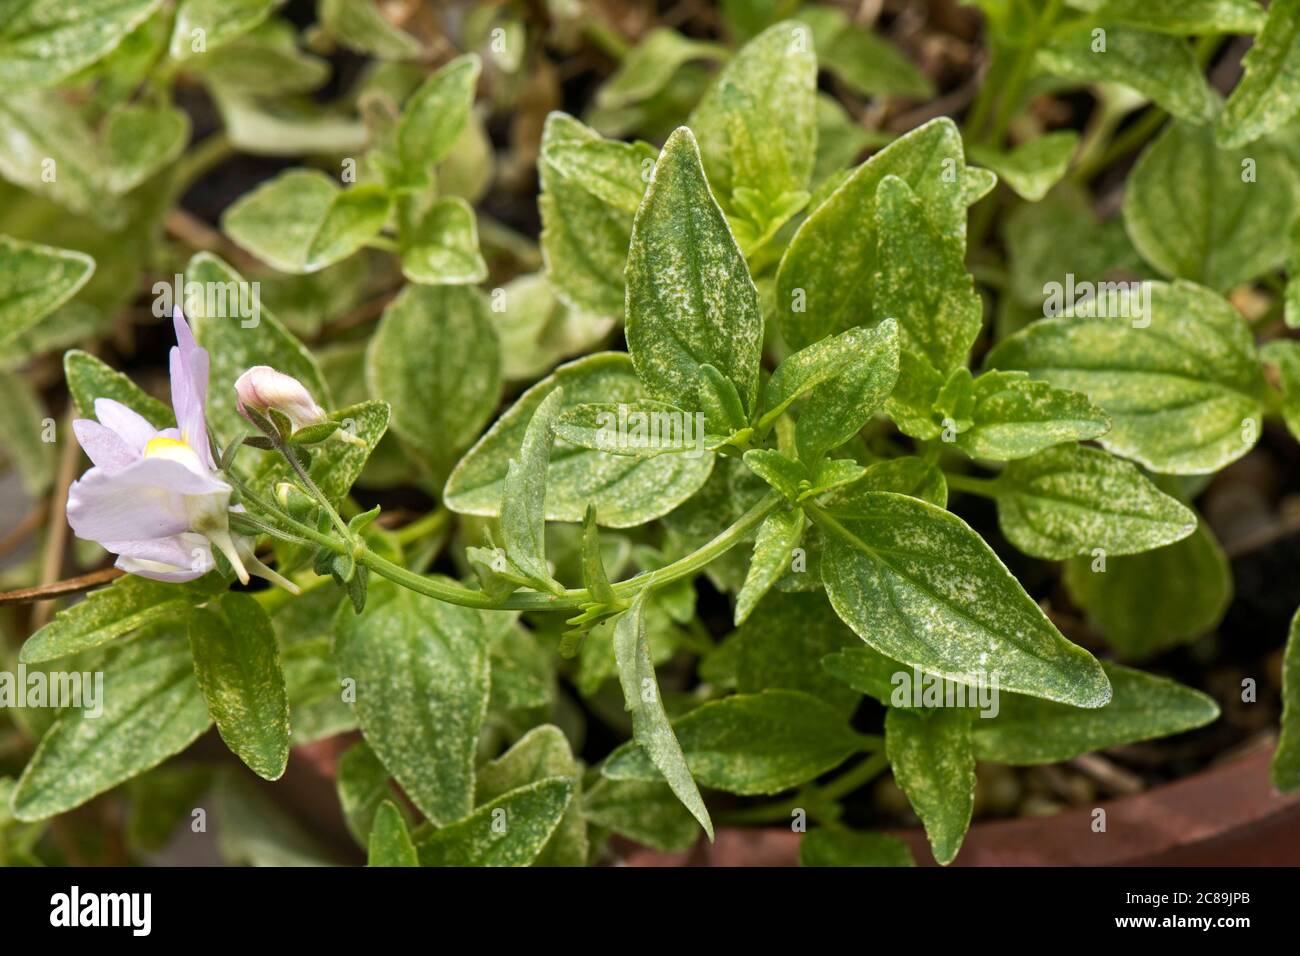 Two-spotted spider mite (Tetranychus urticae) grazing damage to the leaves of a perennial pot plant Nemesia, June Stock Photo